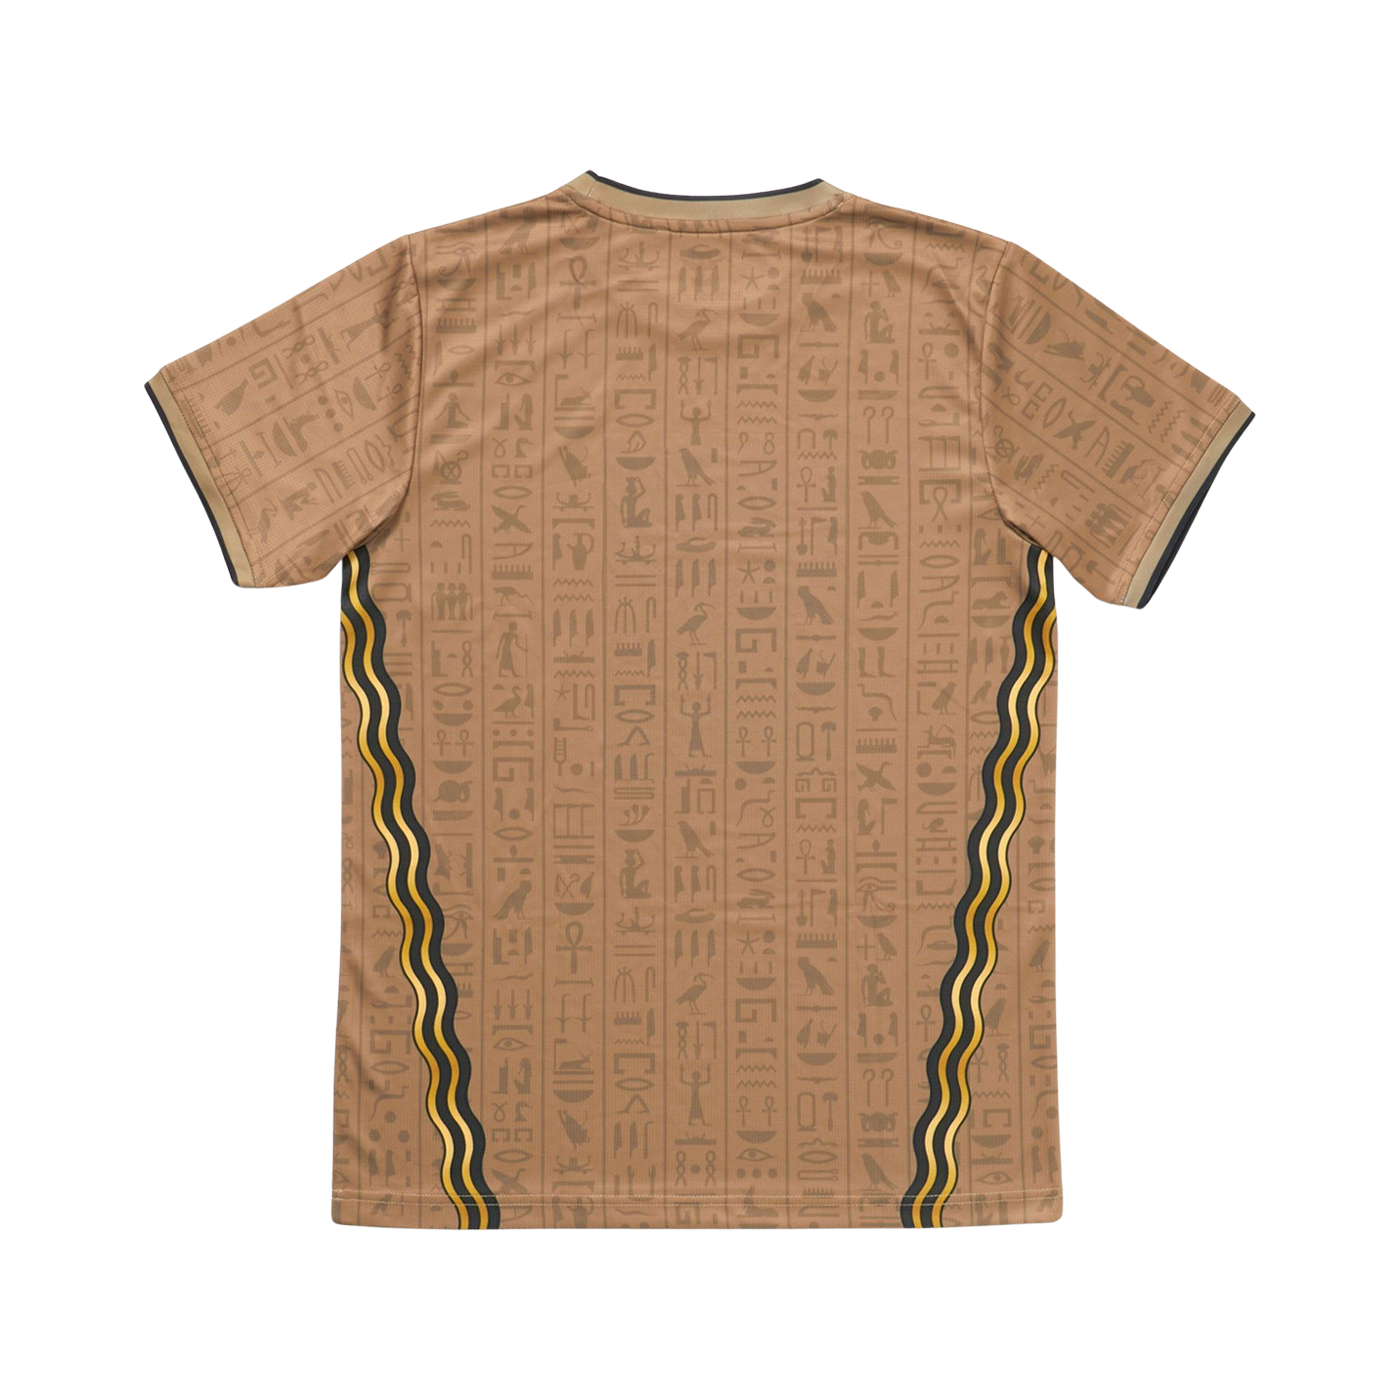 Ancient Egypt National Team - Home